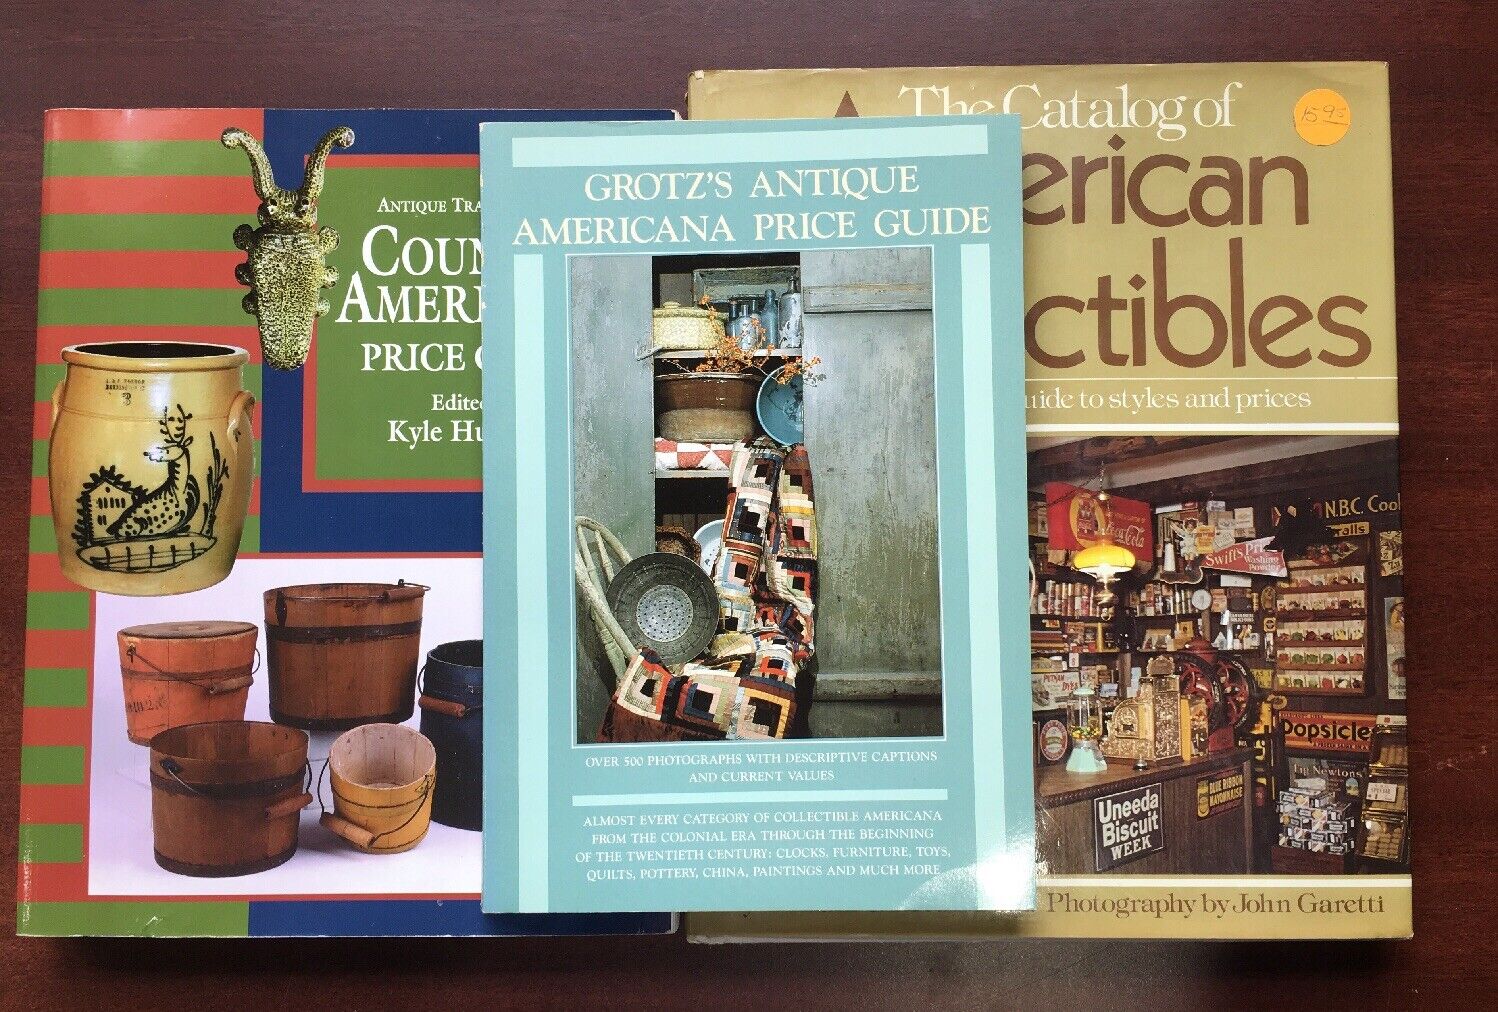 Mix To Book Light Country Americana Grotz’s Antique Guide American Collectibles Без бренда